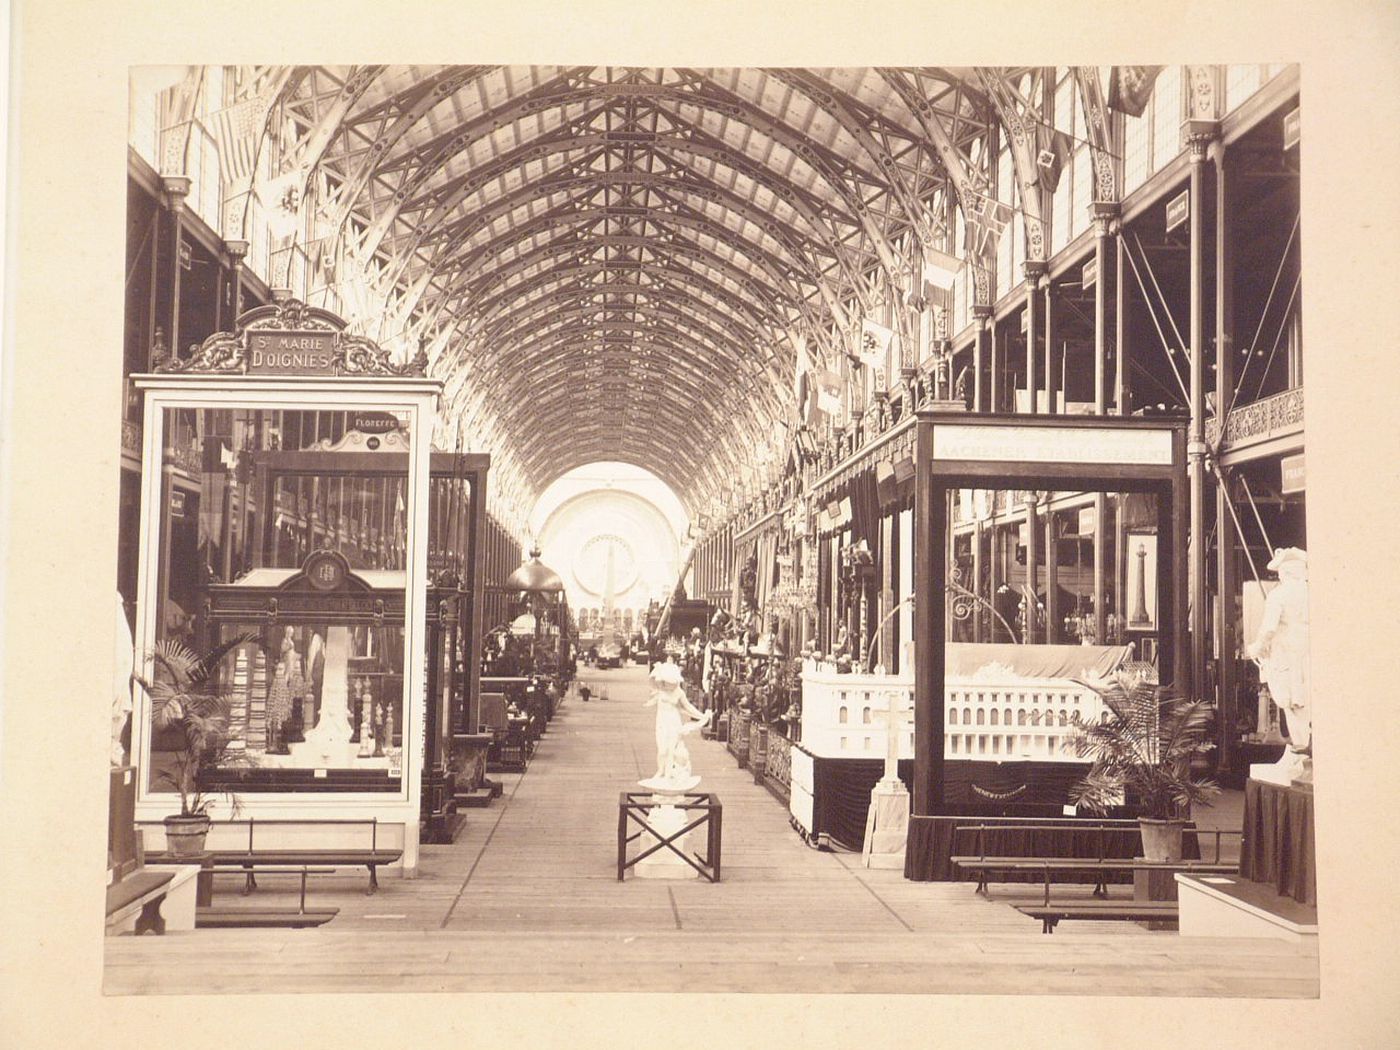 Interior view of Exhibition hall, London, England